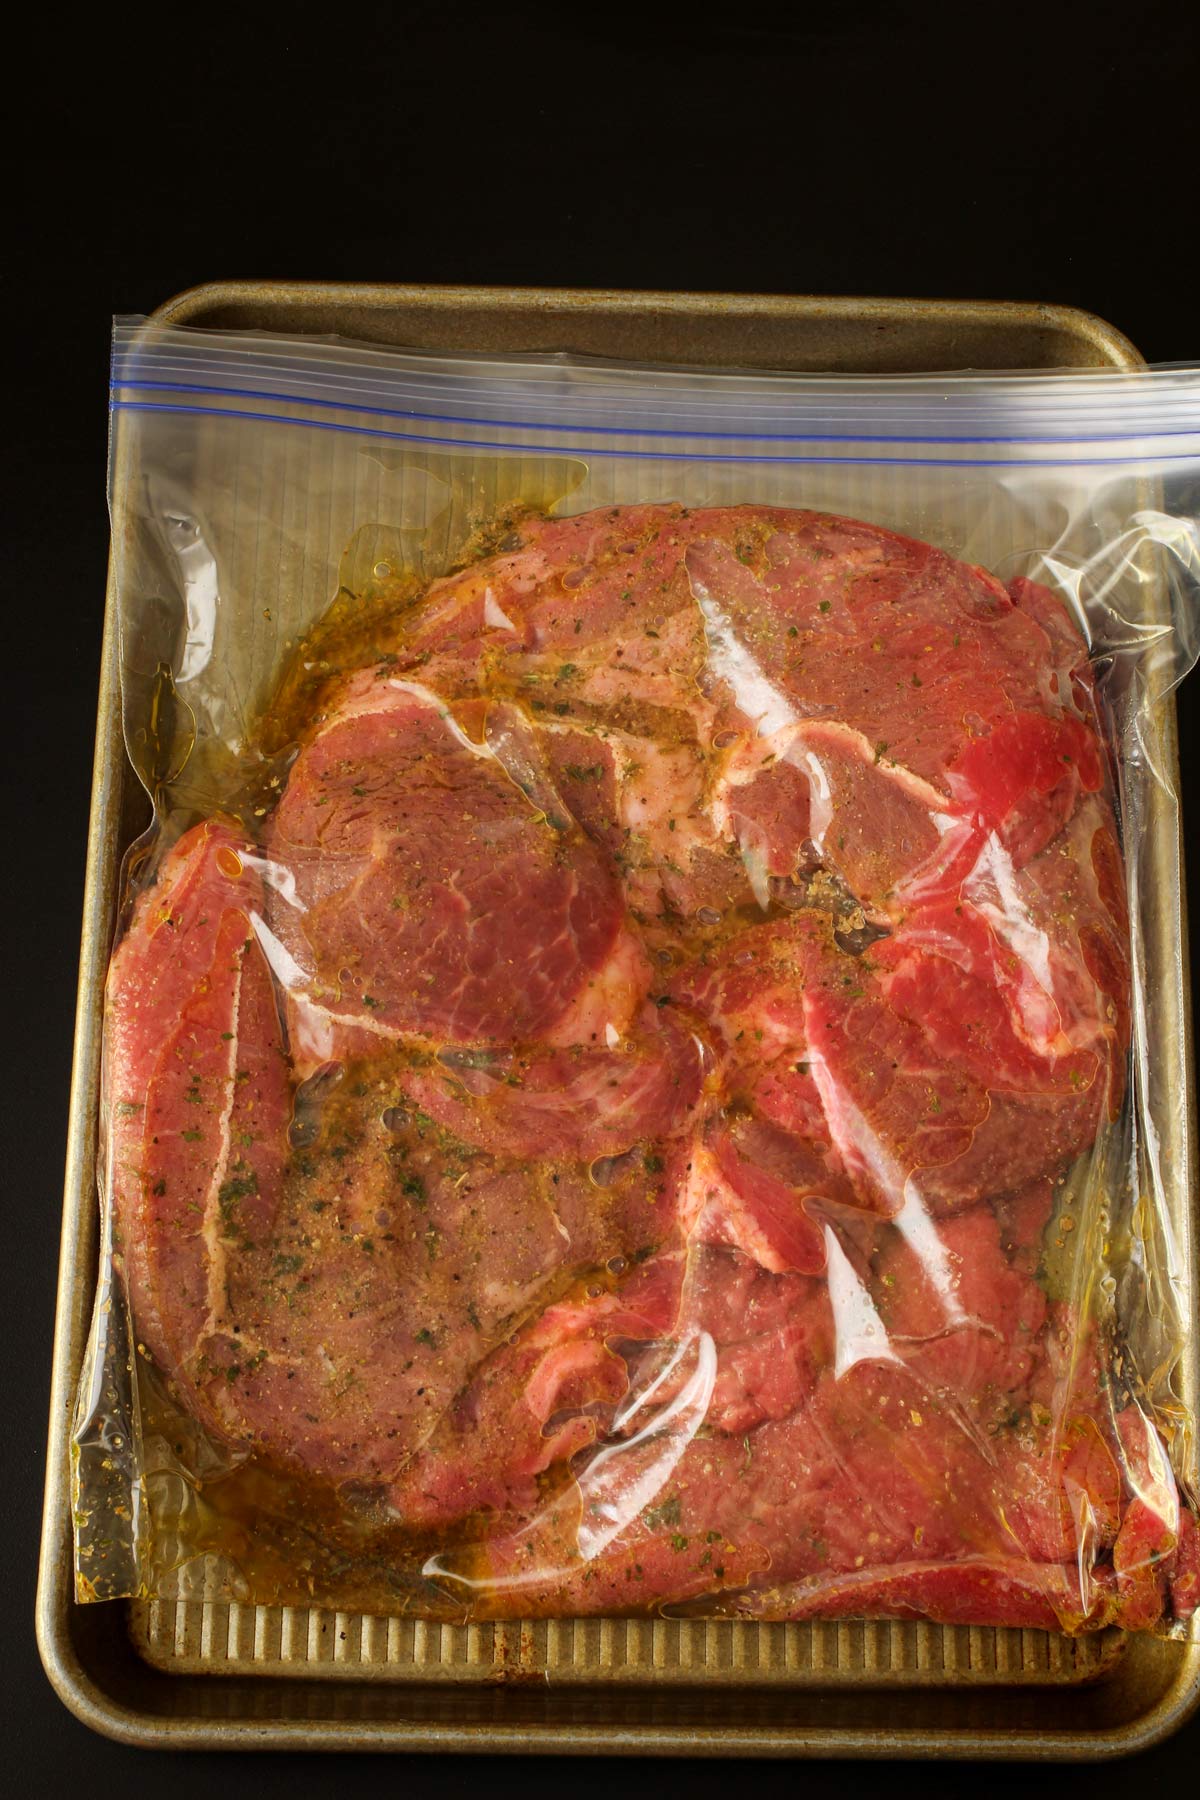 bag of steak and greek marinade on tray.